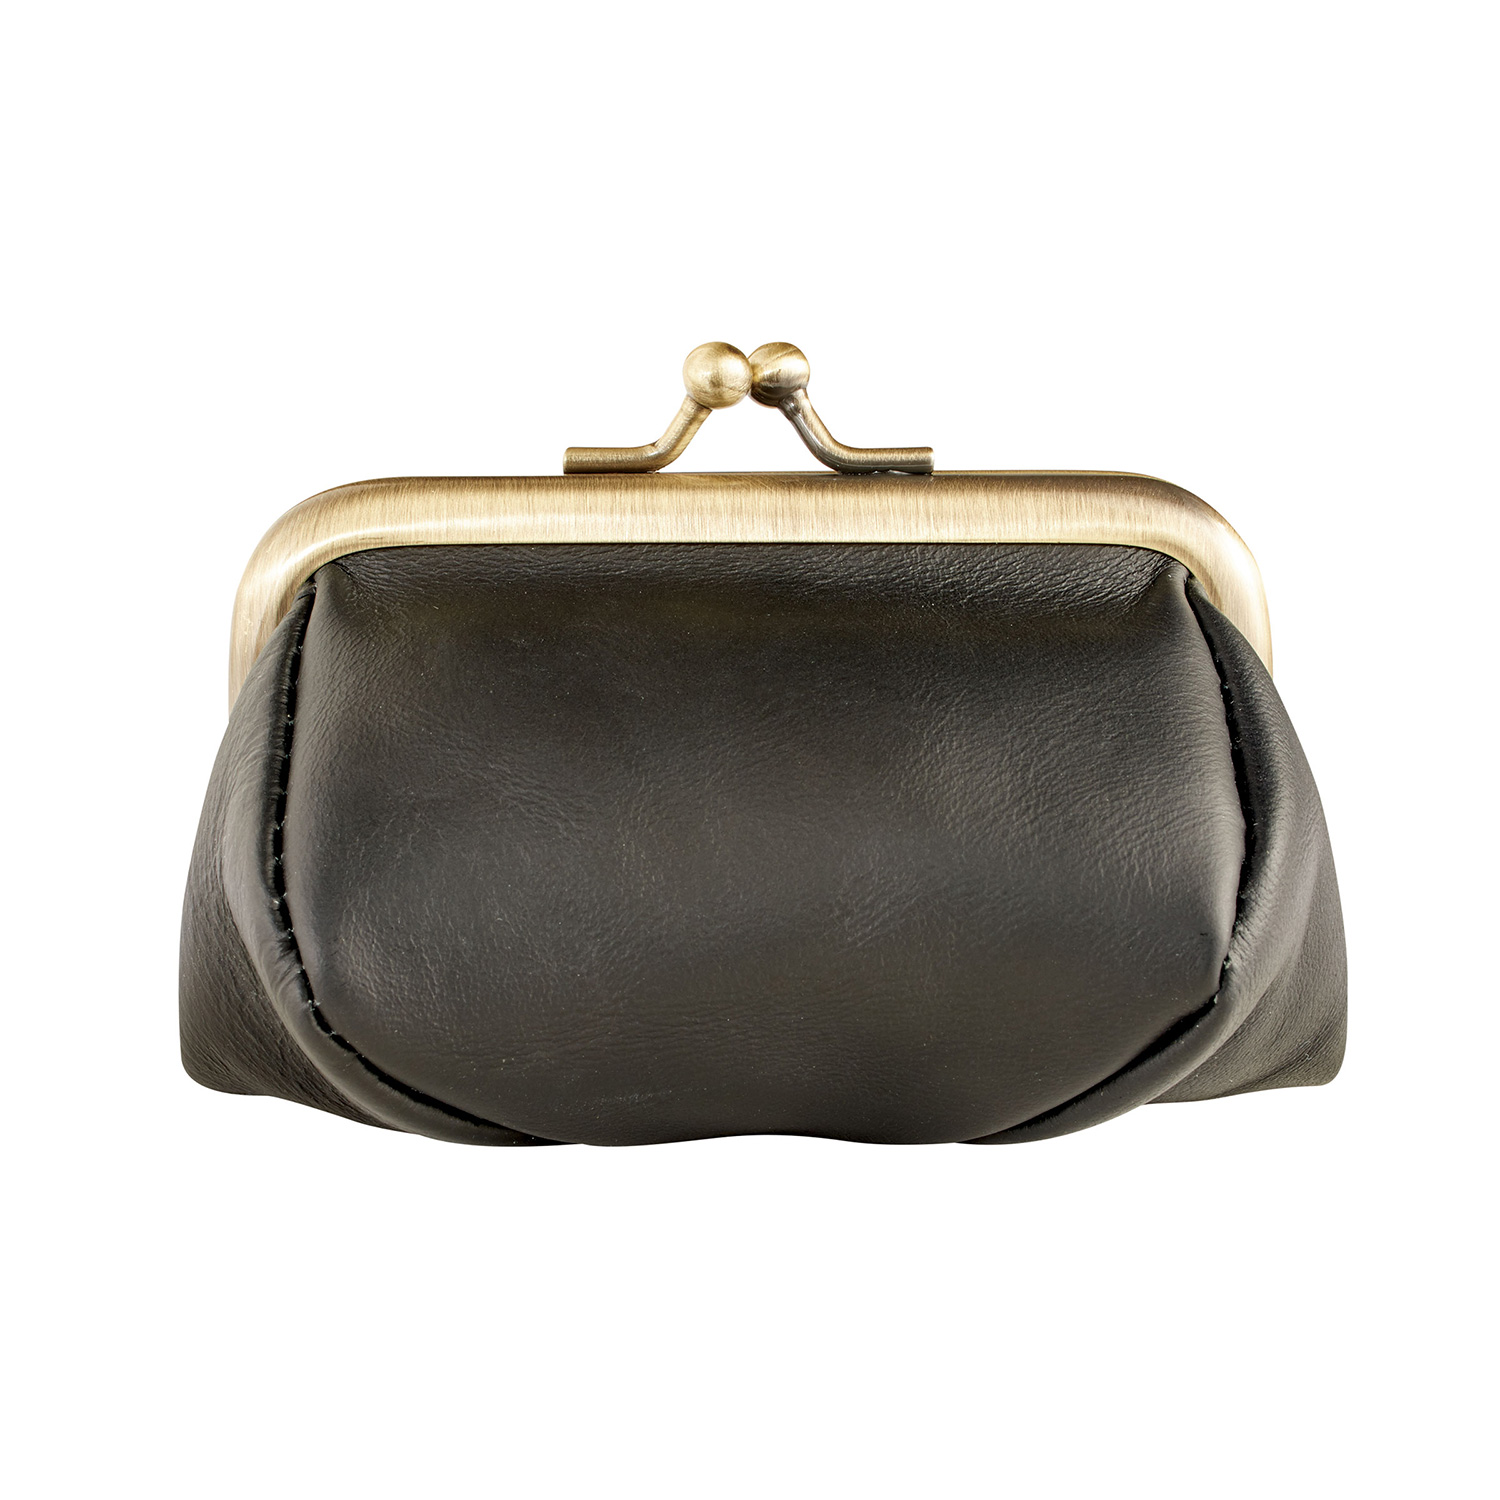 Womens Leather Kiss Lock Coin purse by Improving Lifestyles (BROWN)